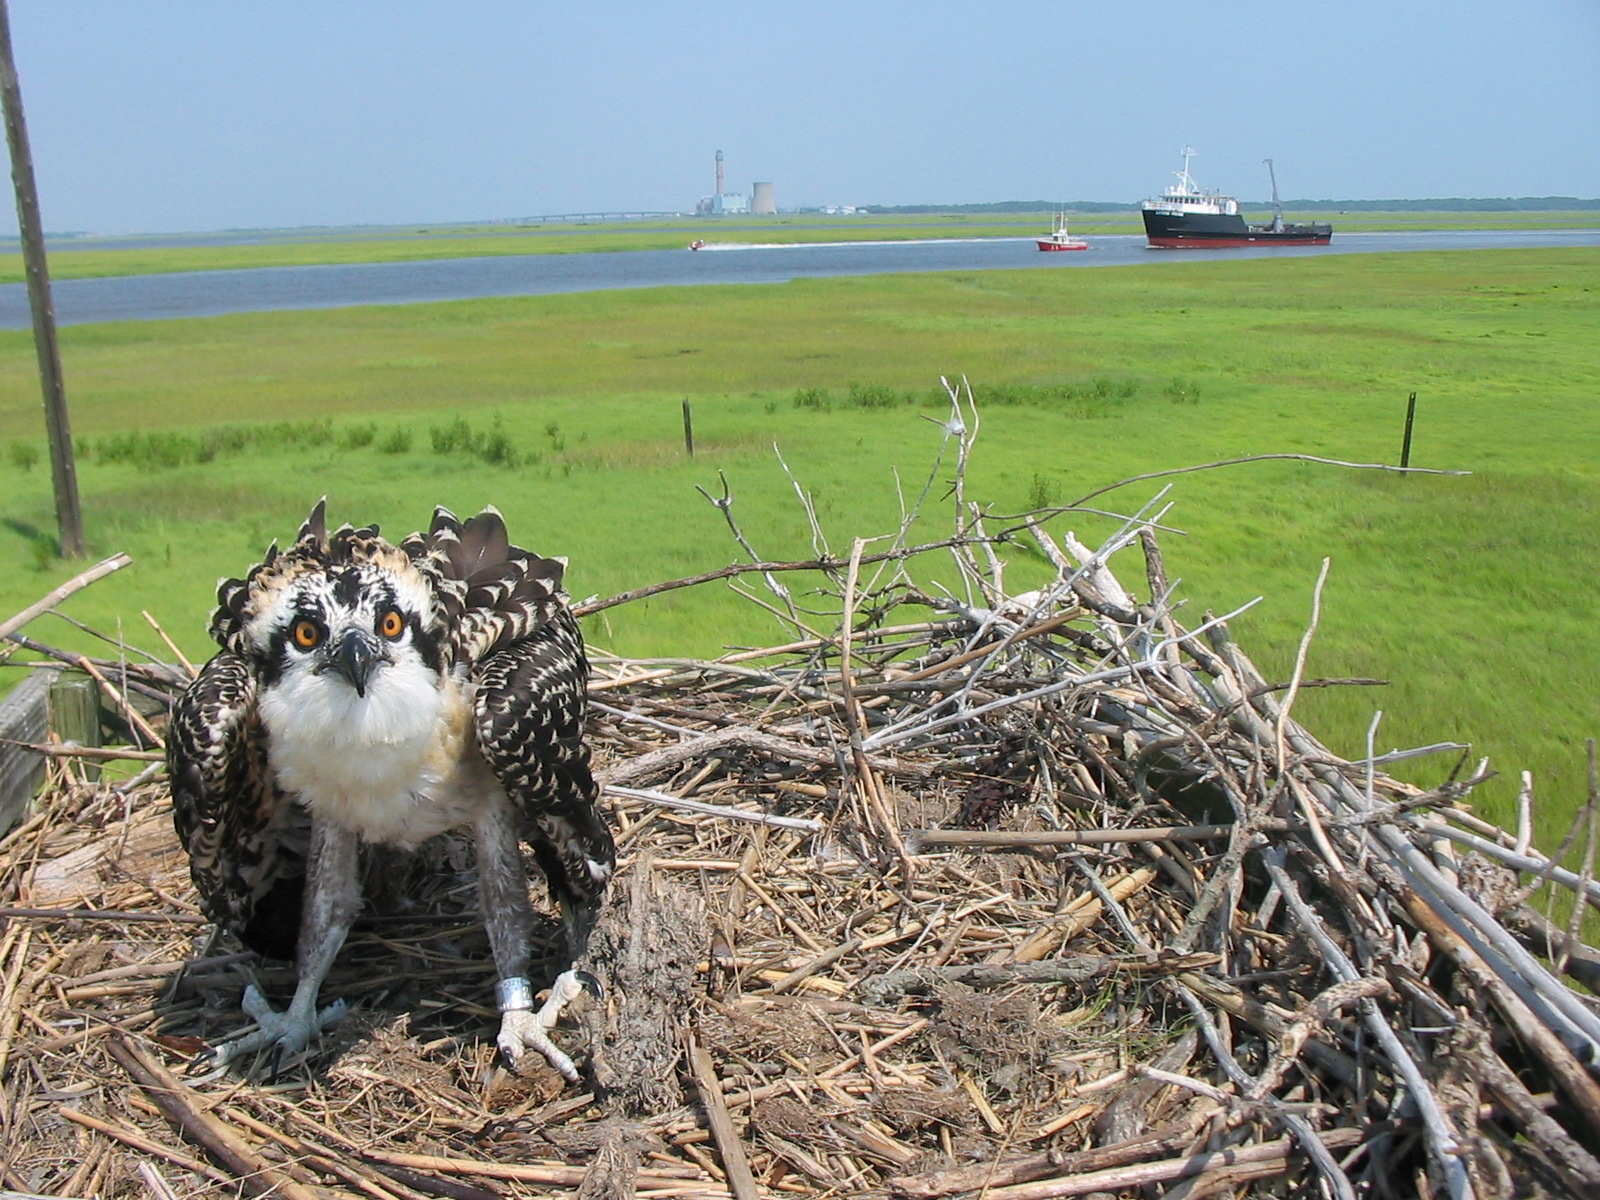 An Osprey is facing the camera in its nest along the Great Egg. A ship and tug boat can be seen in the distant on the water.